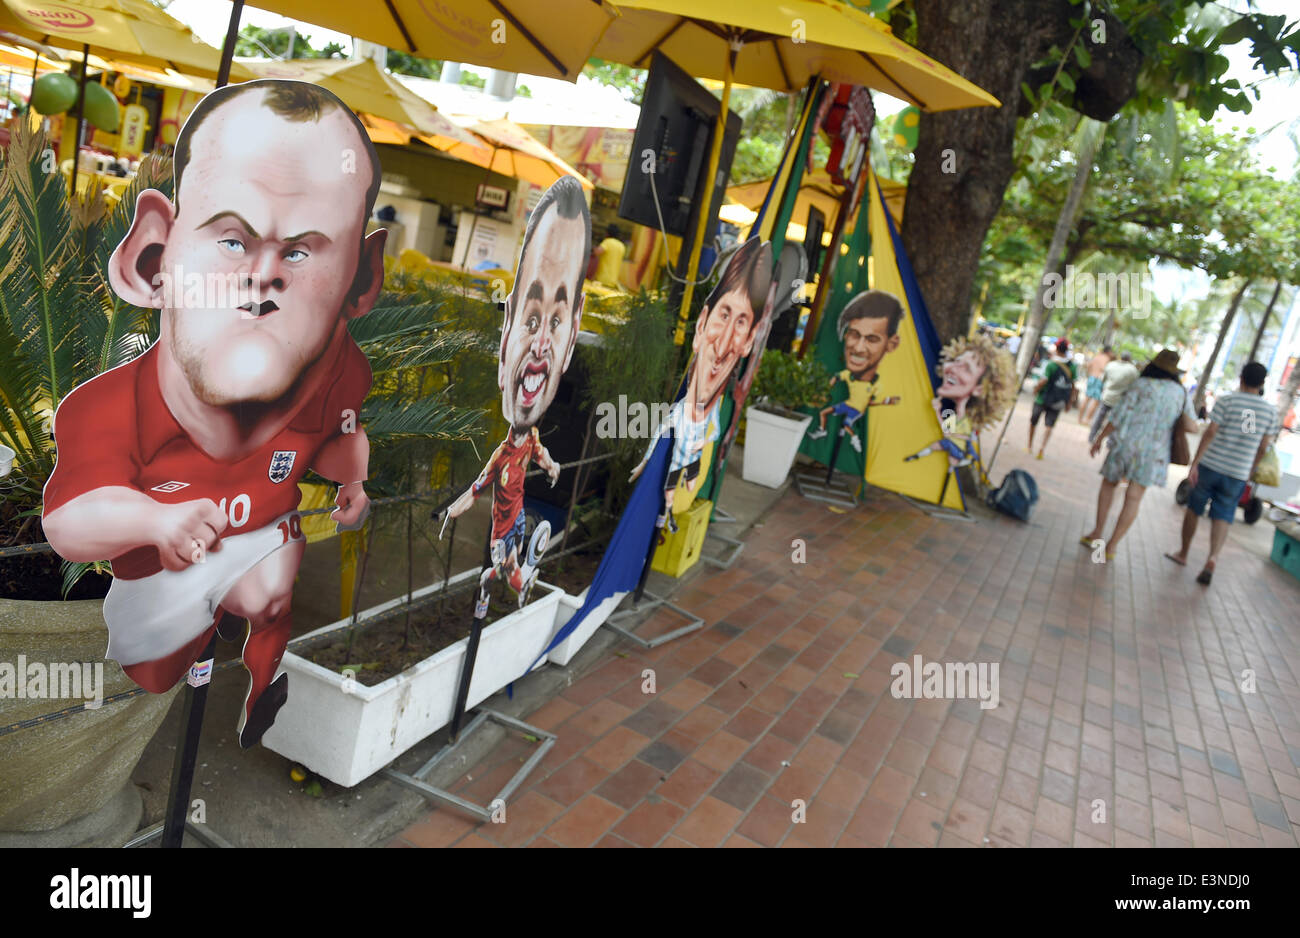 Fortaleza, Brazil. 20th June, 2014. Caricatures of England's Wayne Rooney (L-R) and Spain's Andres Iniesta are seen next to Argentina's Lionel Messi, Brazil's Neymar and David Luiz at a street bar in Fortaleza, Brazil, 20 June 2014. The FIFA World Cup will take place in Brazil from 12 June to 13 July 2014. Photo: Marcus Brandt/dpa/Alamy Live News Stock Photo